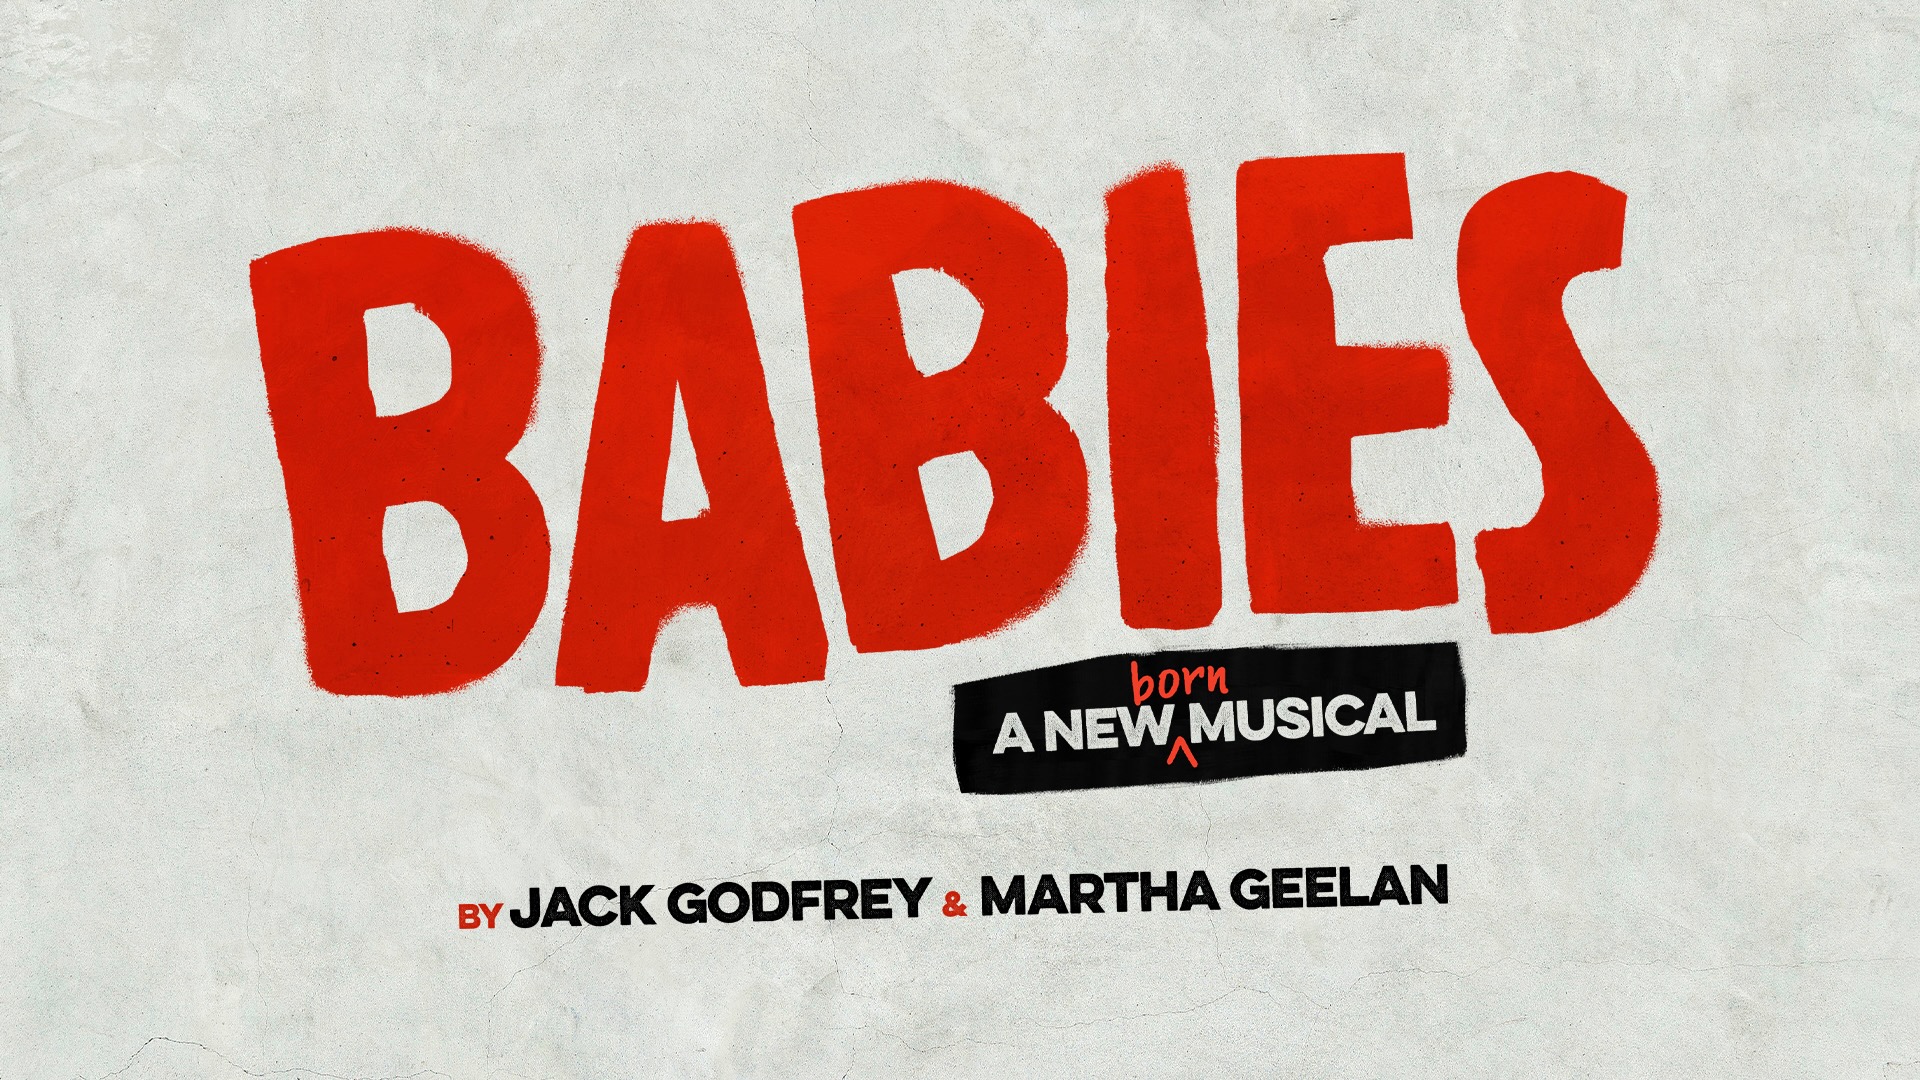 Babies musical poster